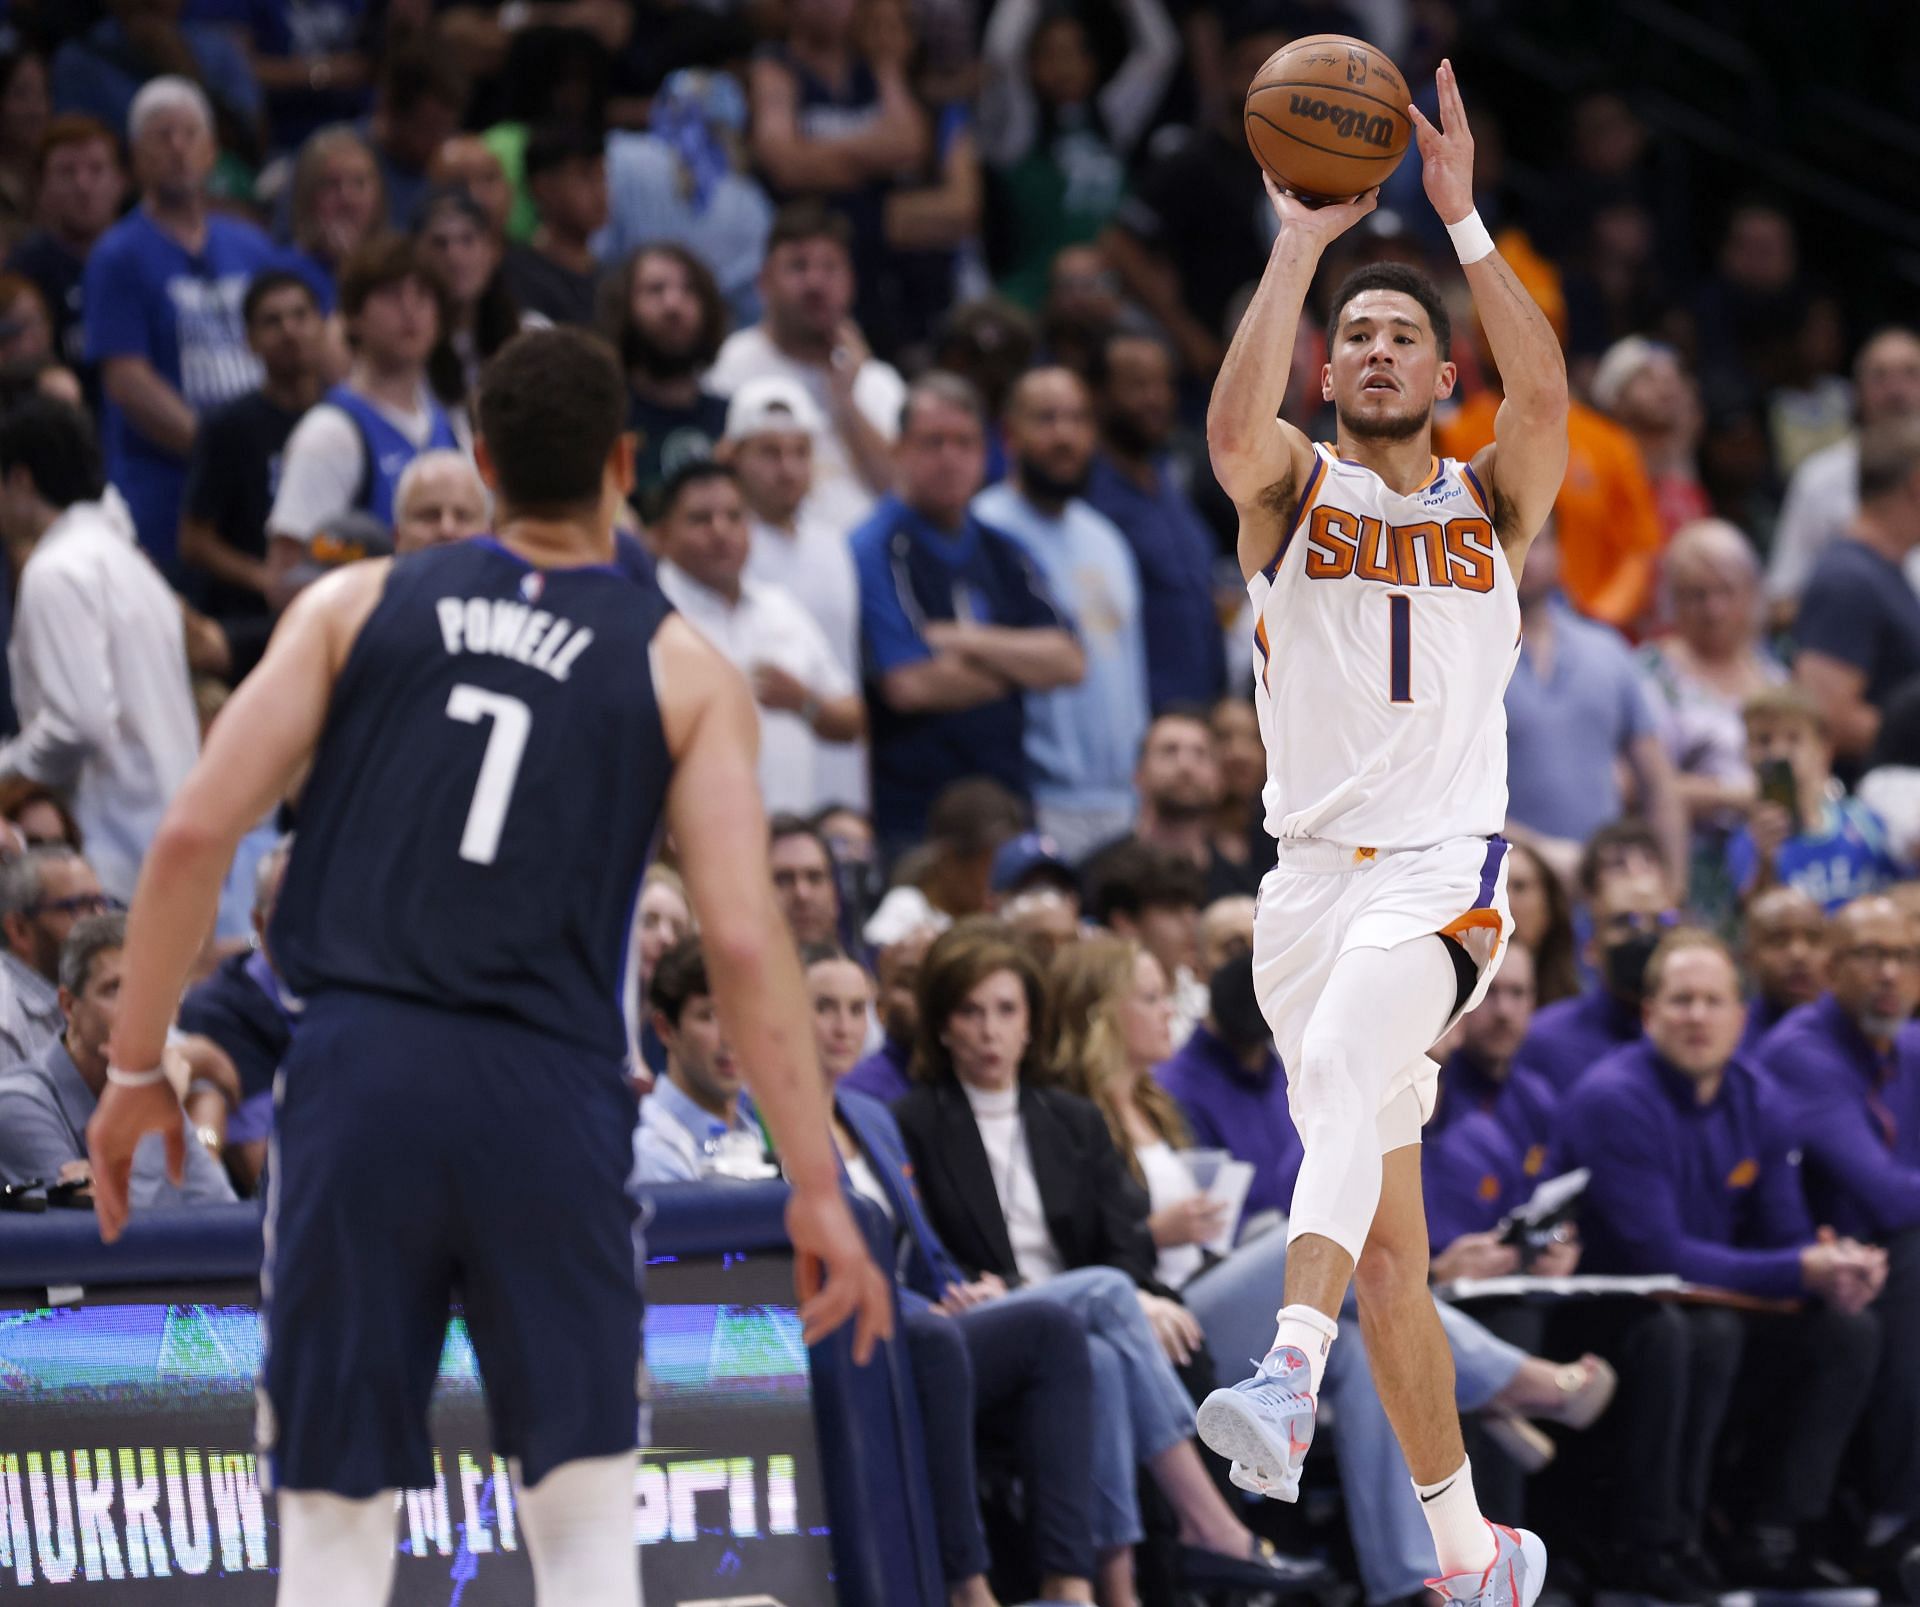 The Suns will be counting on Devin Booker tonight to lead them to their second straight Western Conference finals.